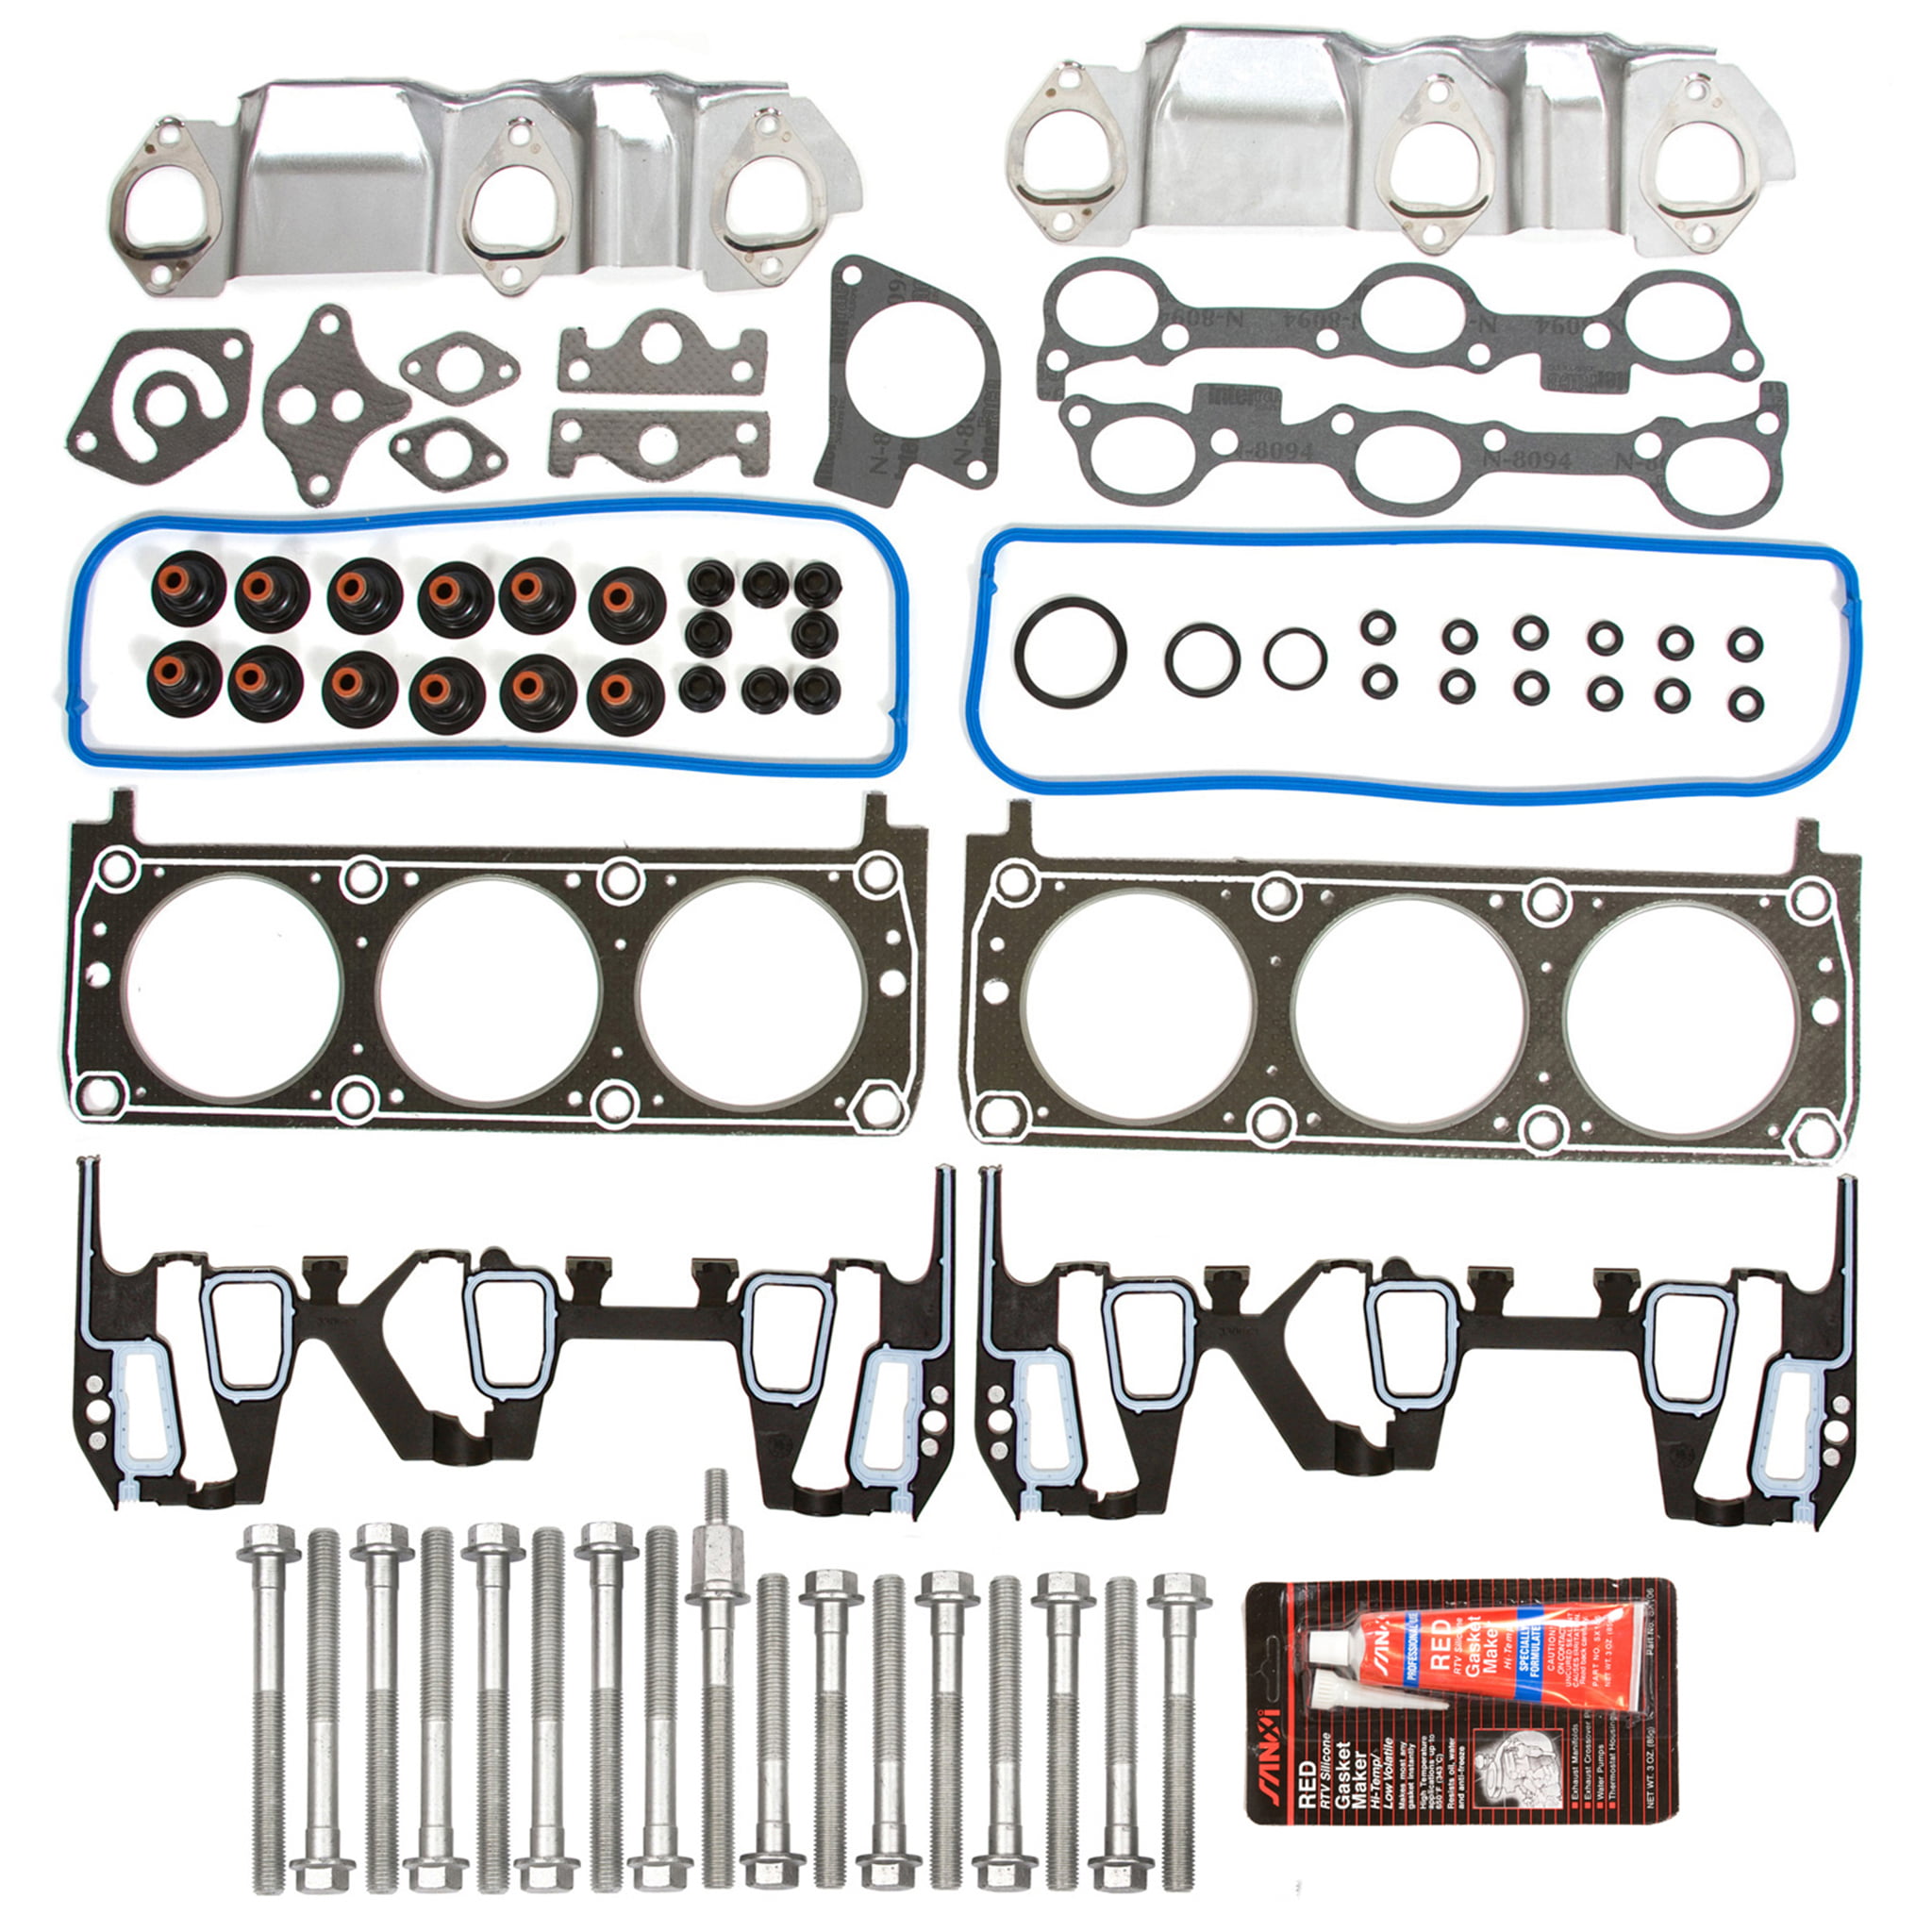 Domestic Gaskets HSHBLF8-10402 Lifter Replacement Kit fits 95-99 Chevrolet Pontiac Buick Oldsmobile 3.1 OHV Head Gasket Set Head Bolts Lifters 